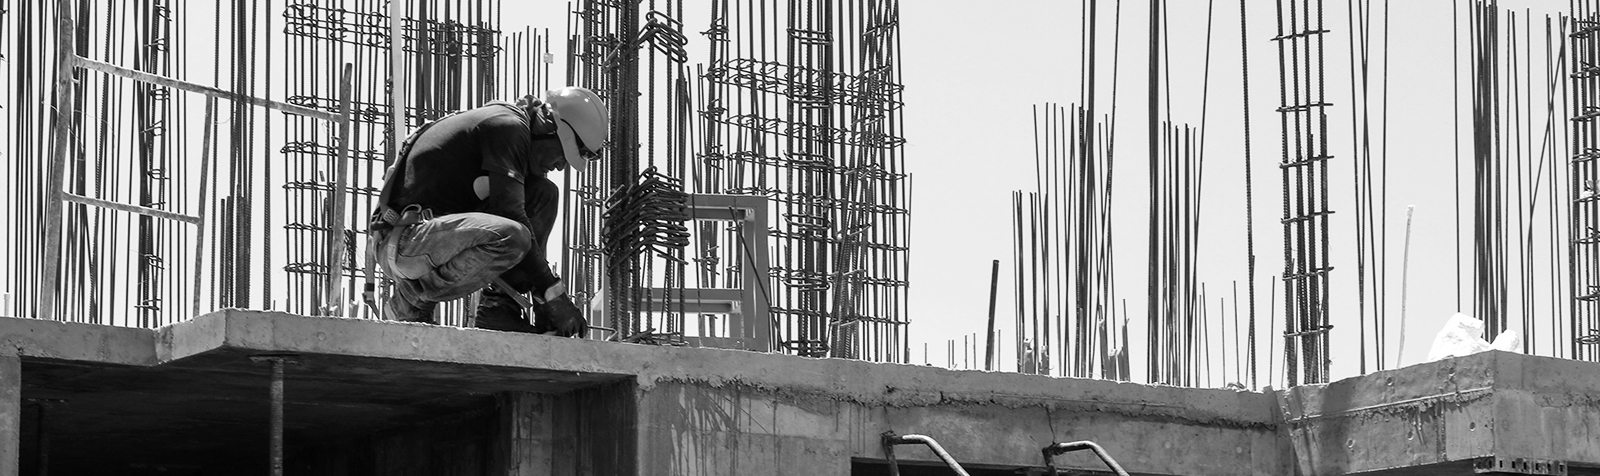 unsplash-bw-construction-materials-supplier-builds-up-equipment-and-employee-engagement